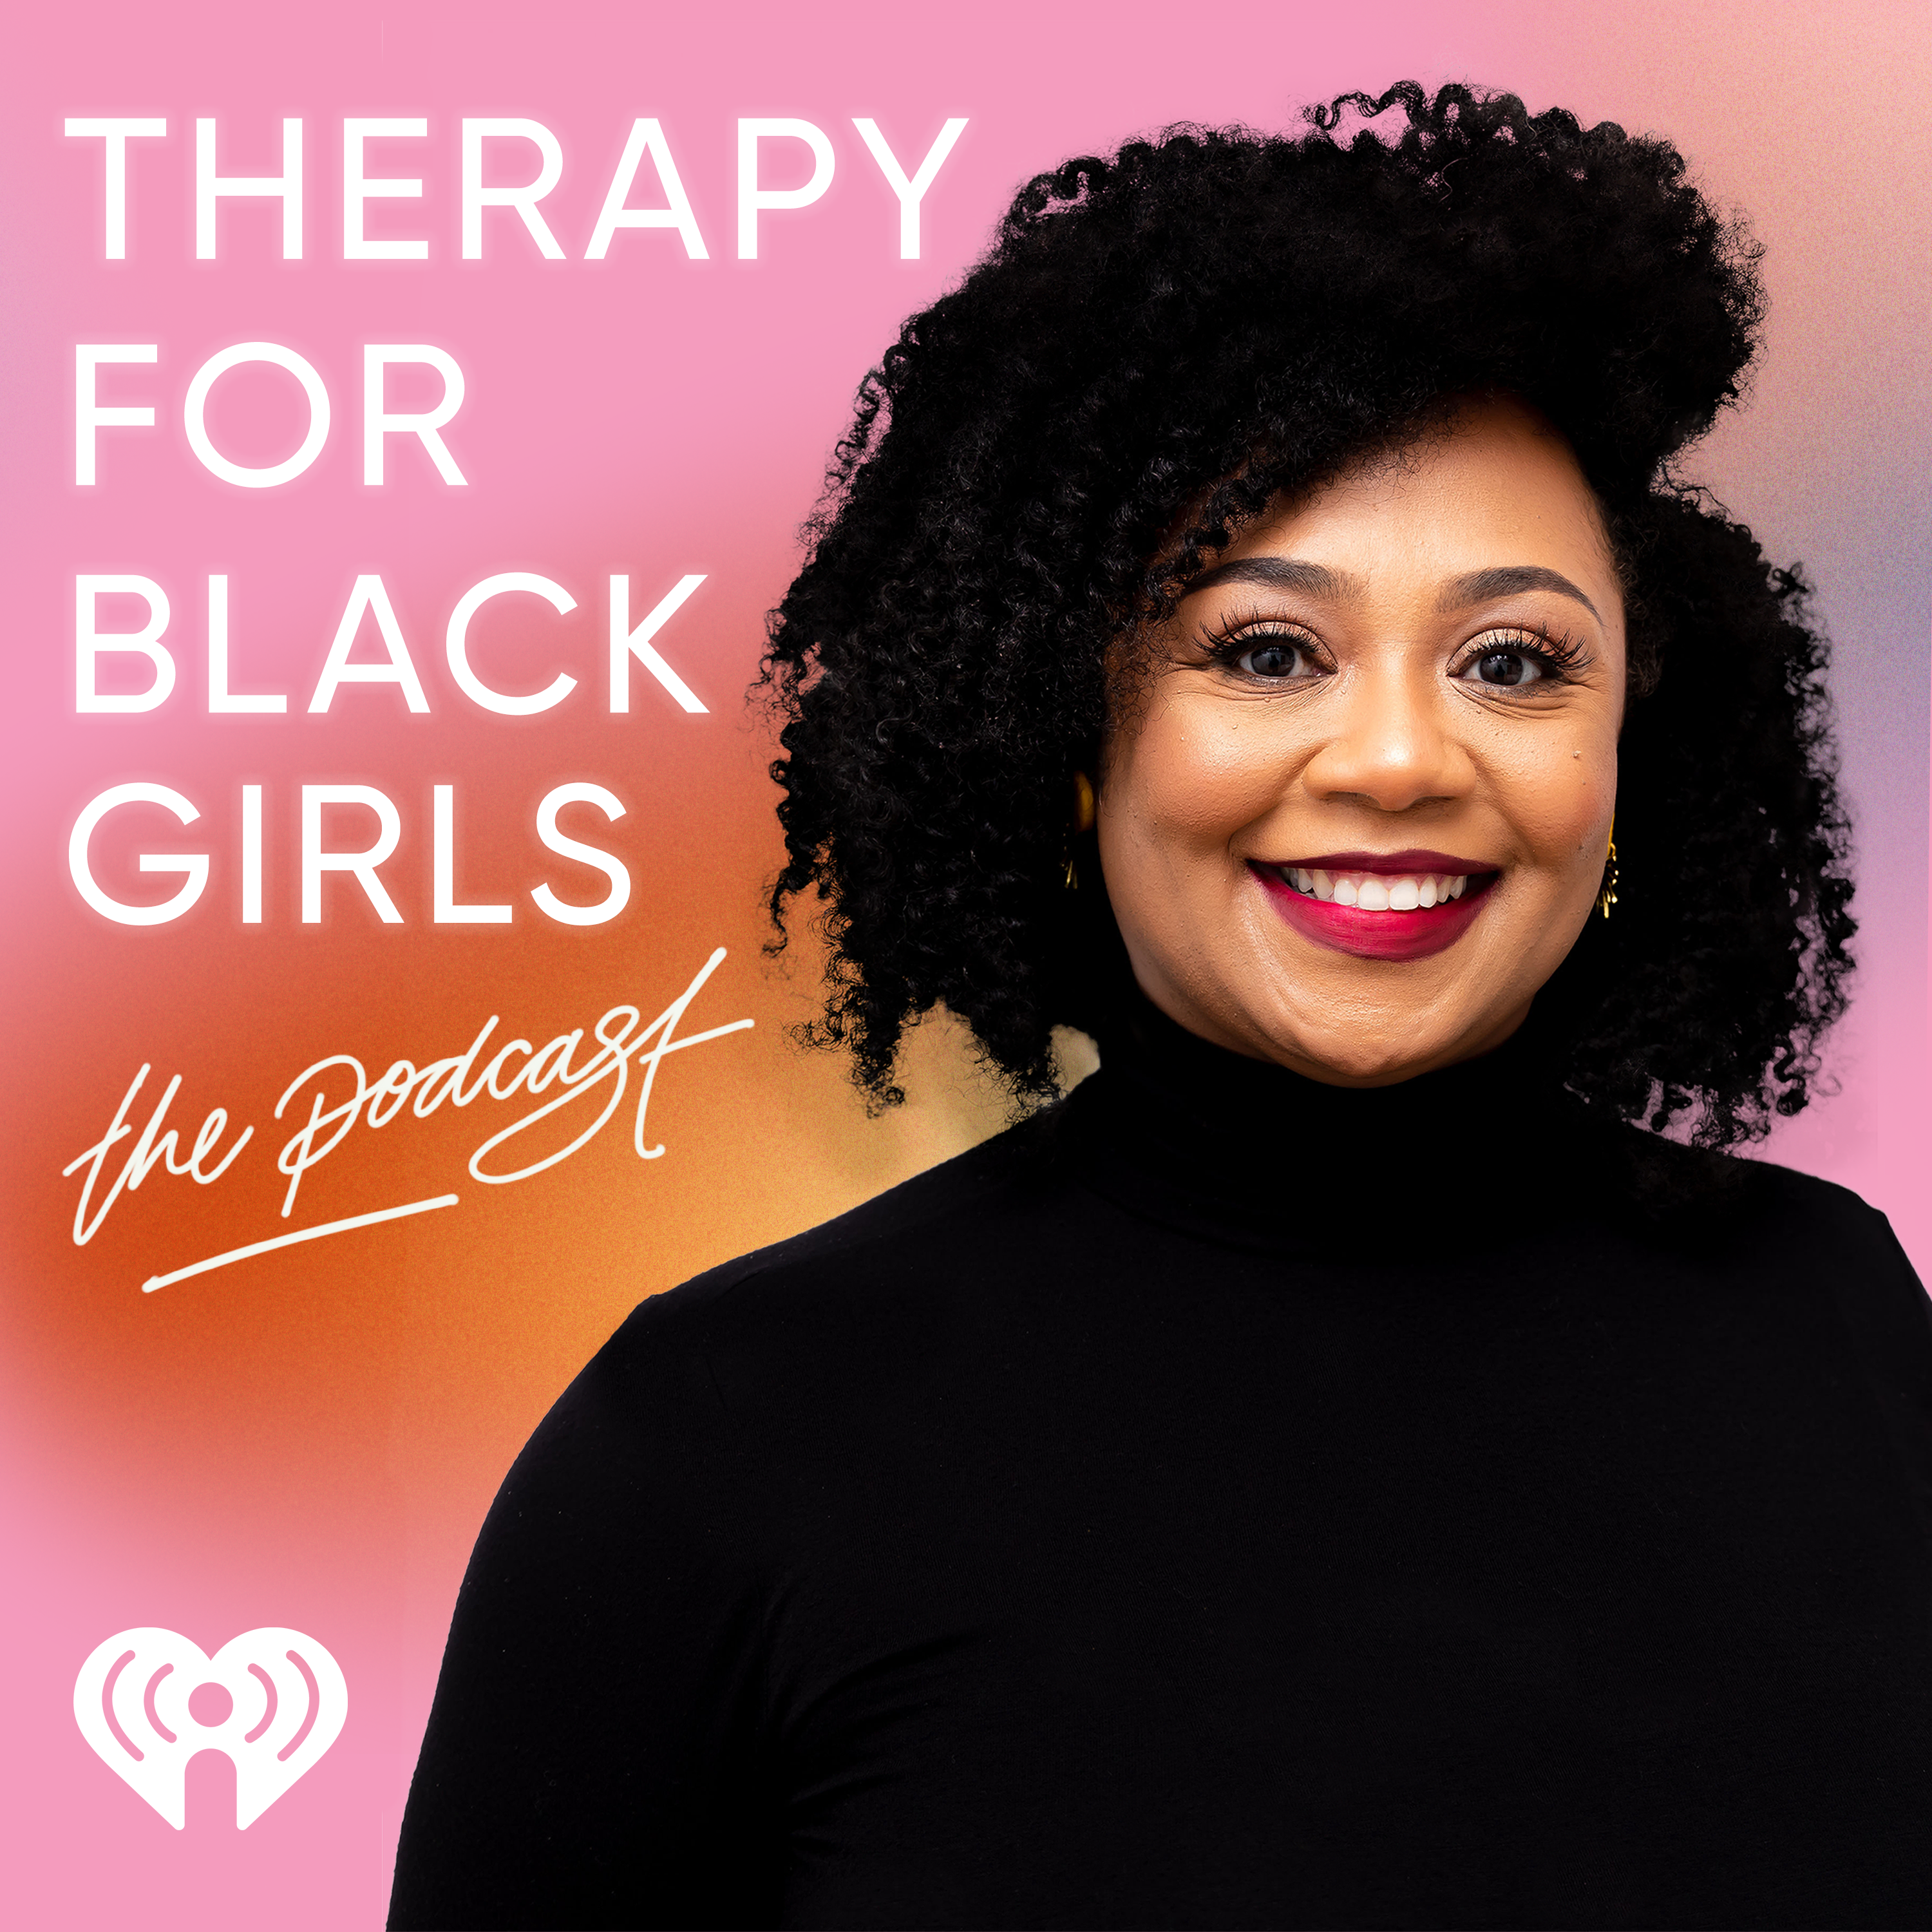 Therapy for Black Girls - Session 254: Black Women In the Workplace